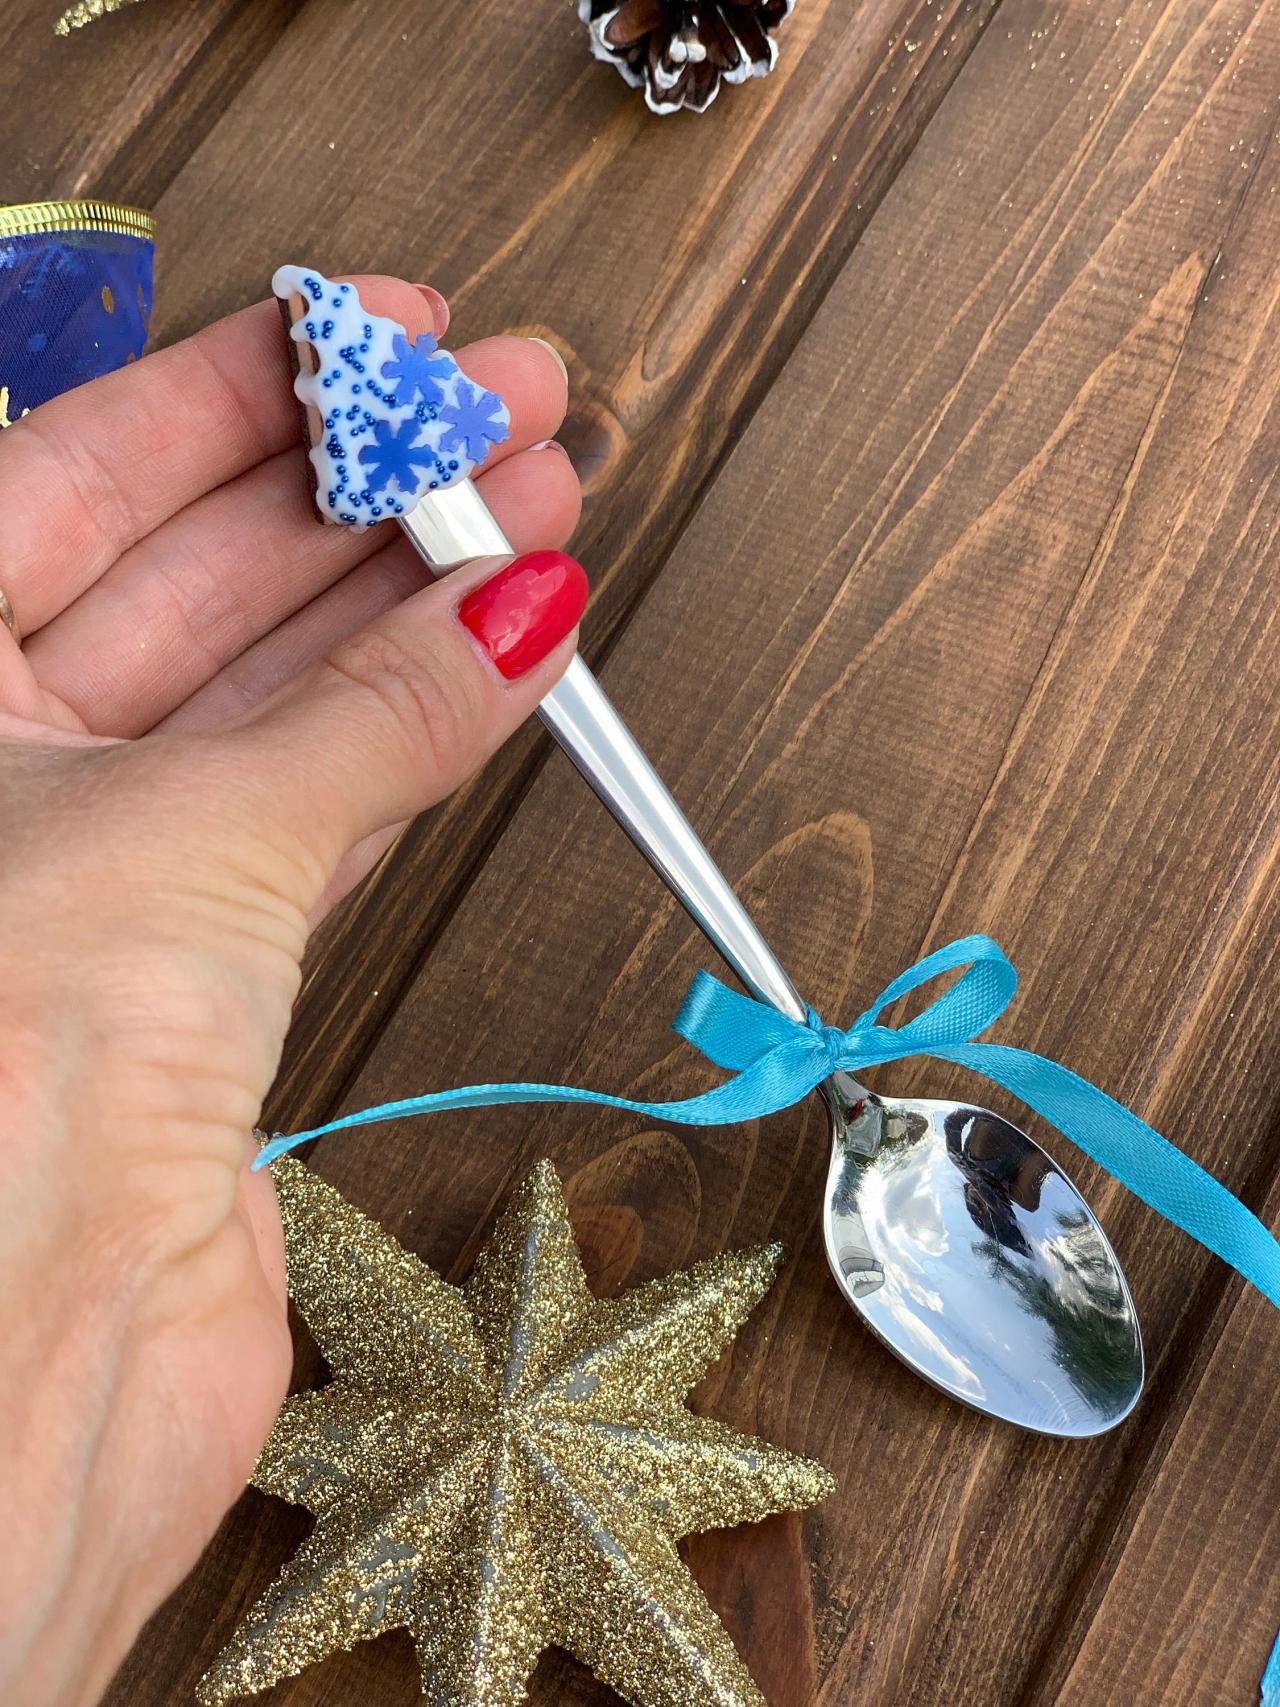 Christmas spoon, Christmas present, decorated spoon, cake on a spoon, New Year's gift, decorated spoon, handmade spoon